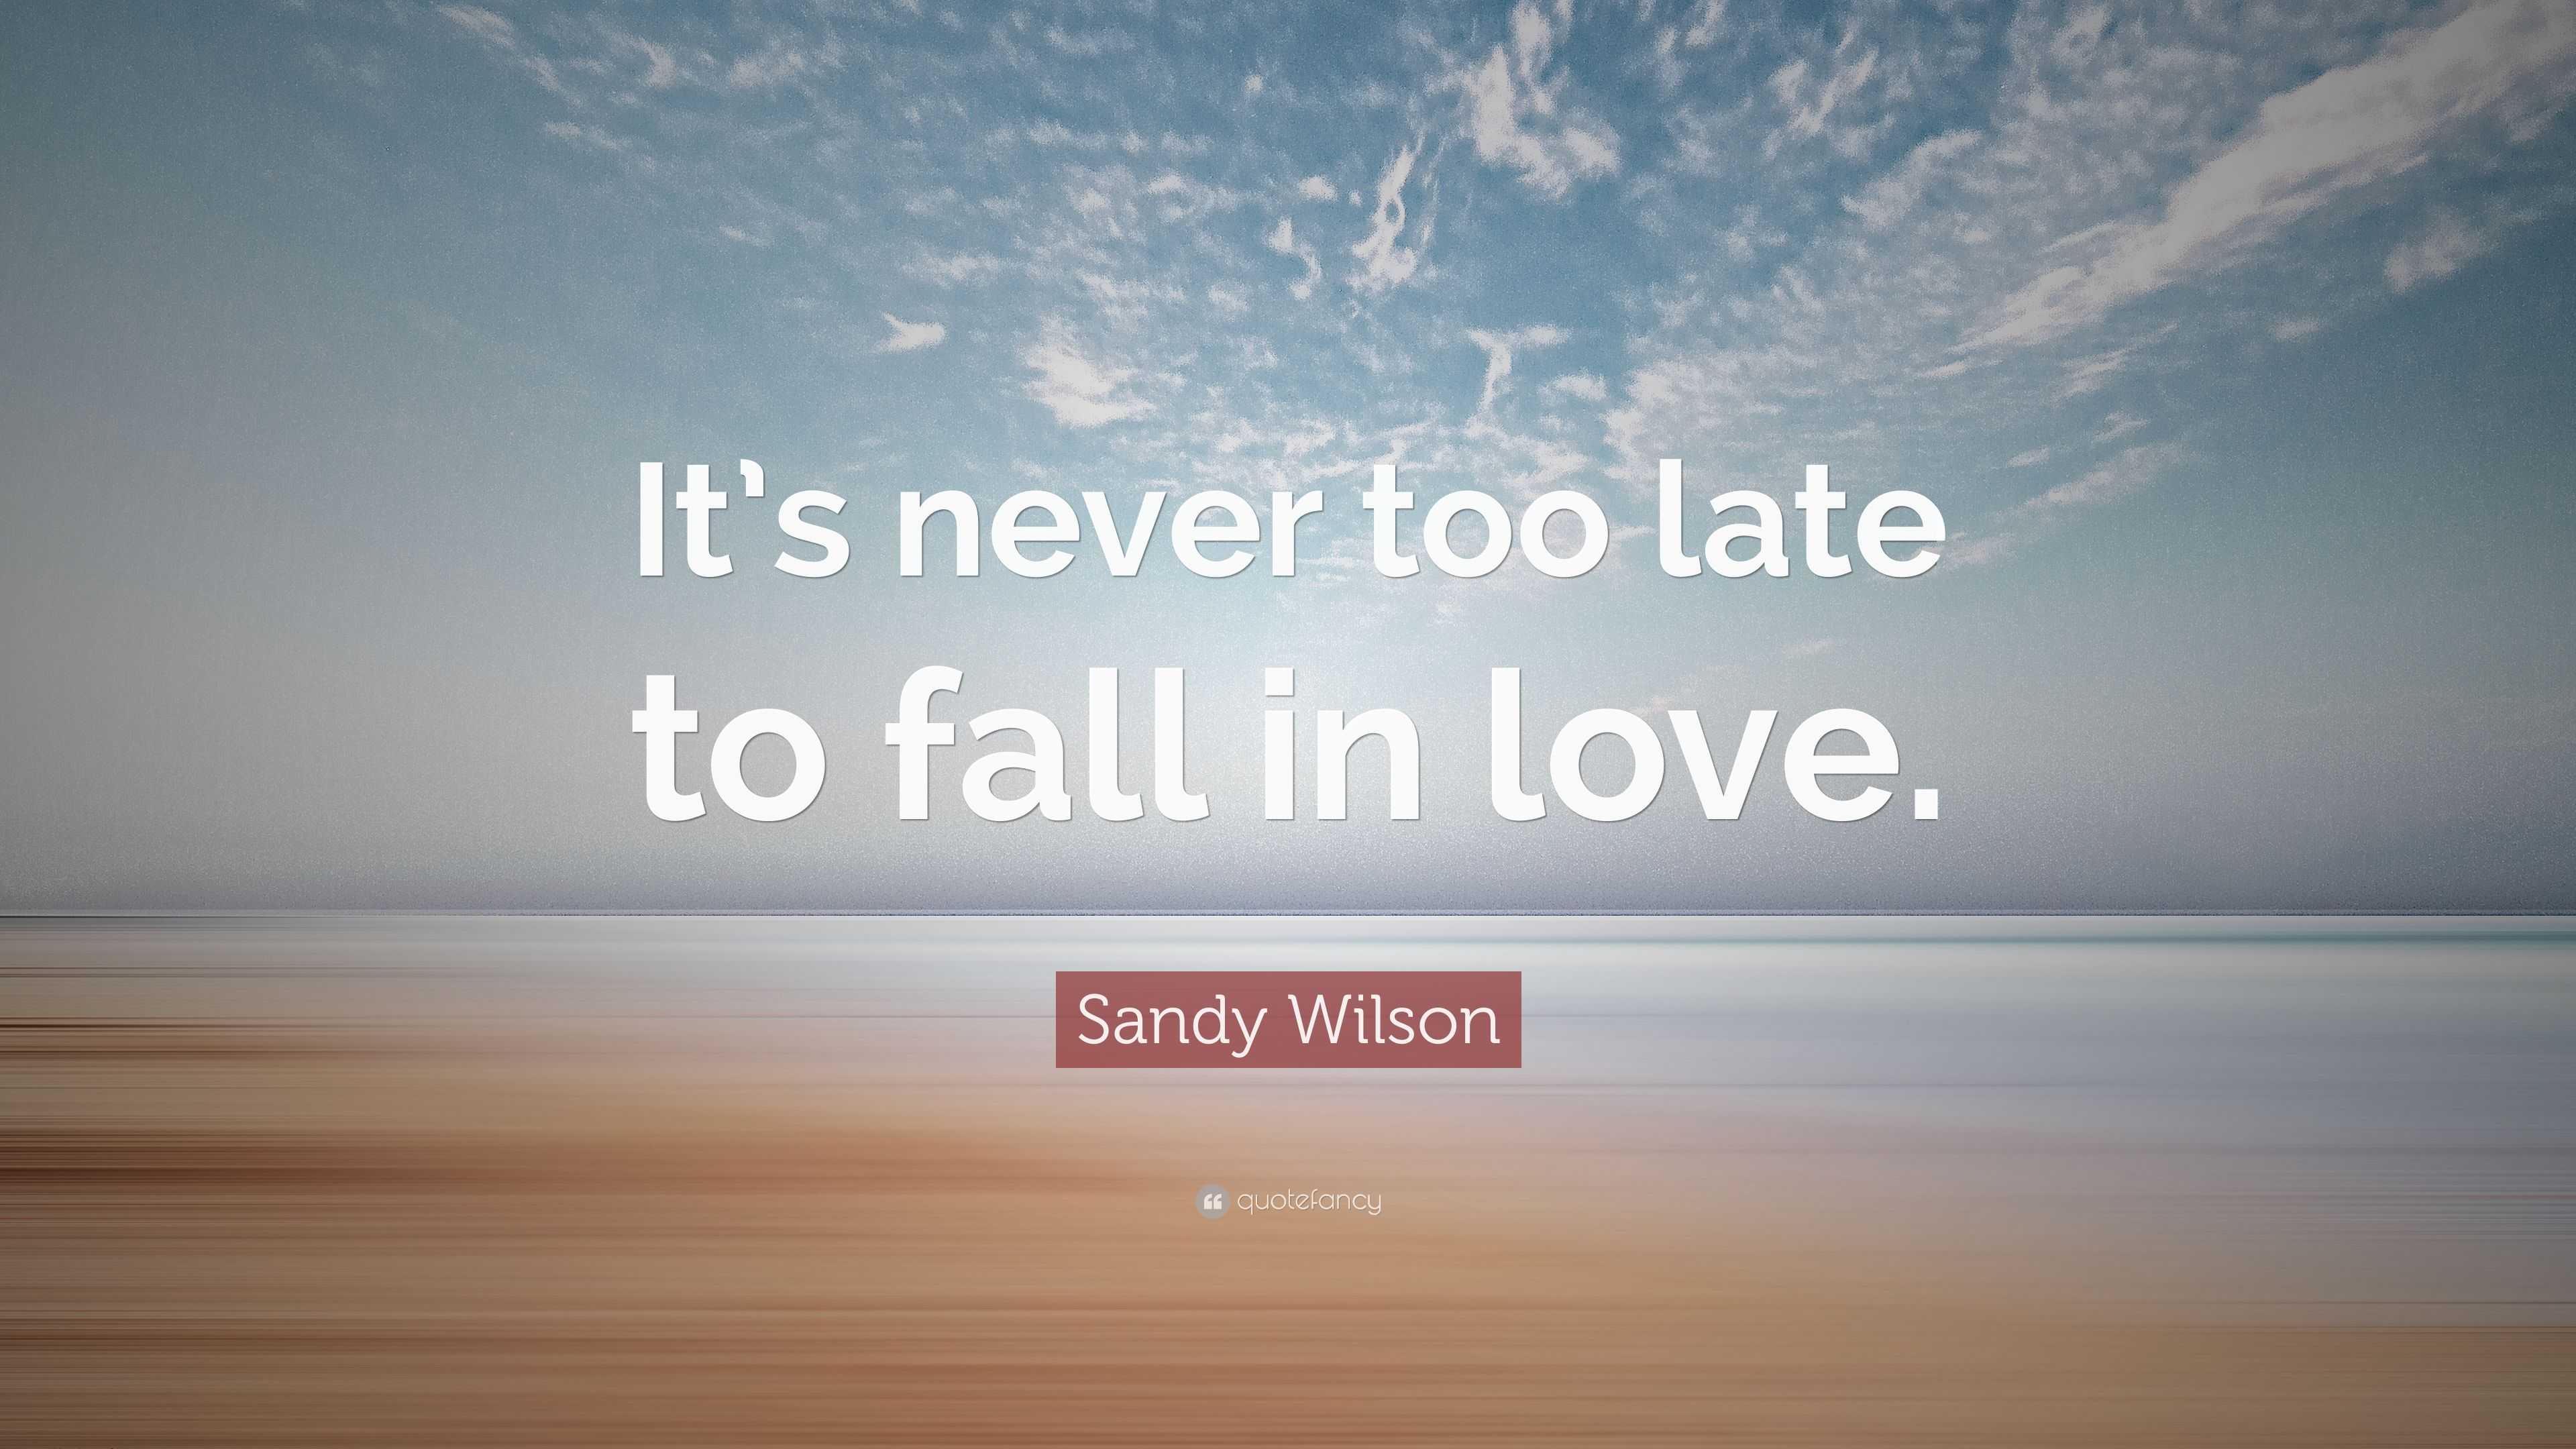 Sandy Wilson Quote “It s never too late to fall in love ”